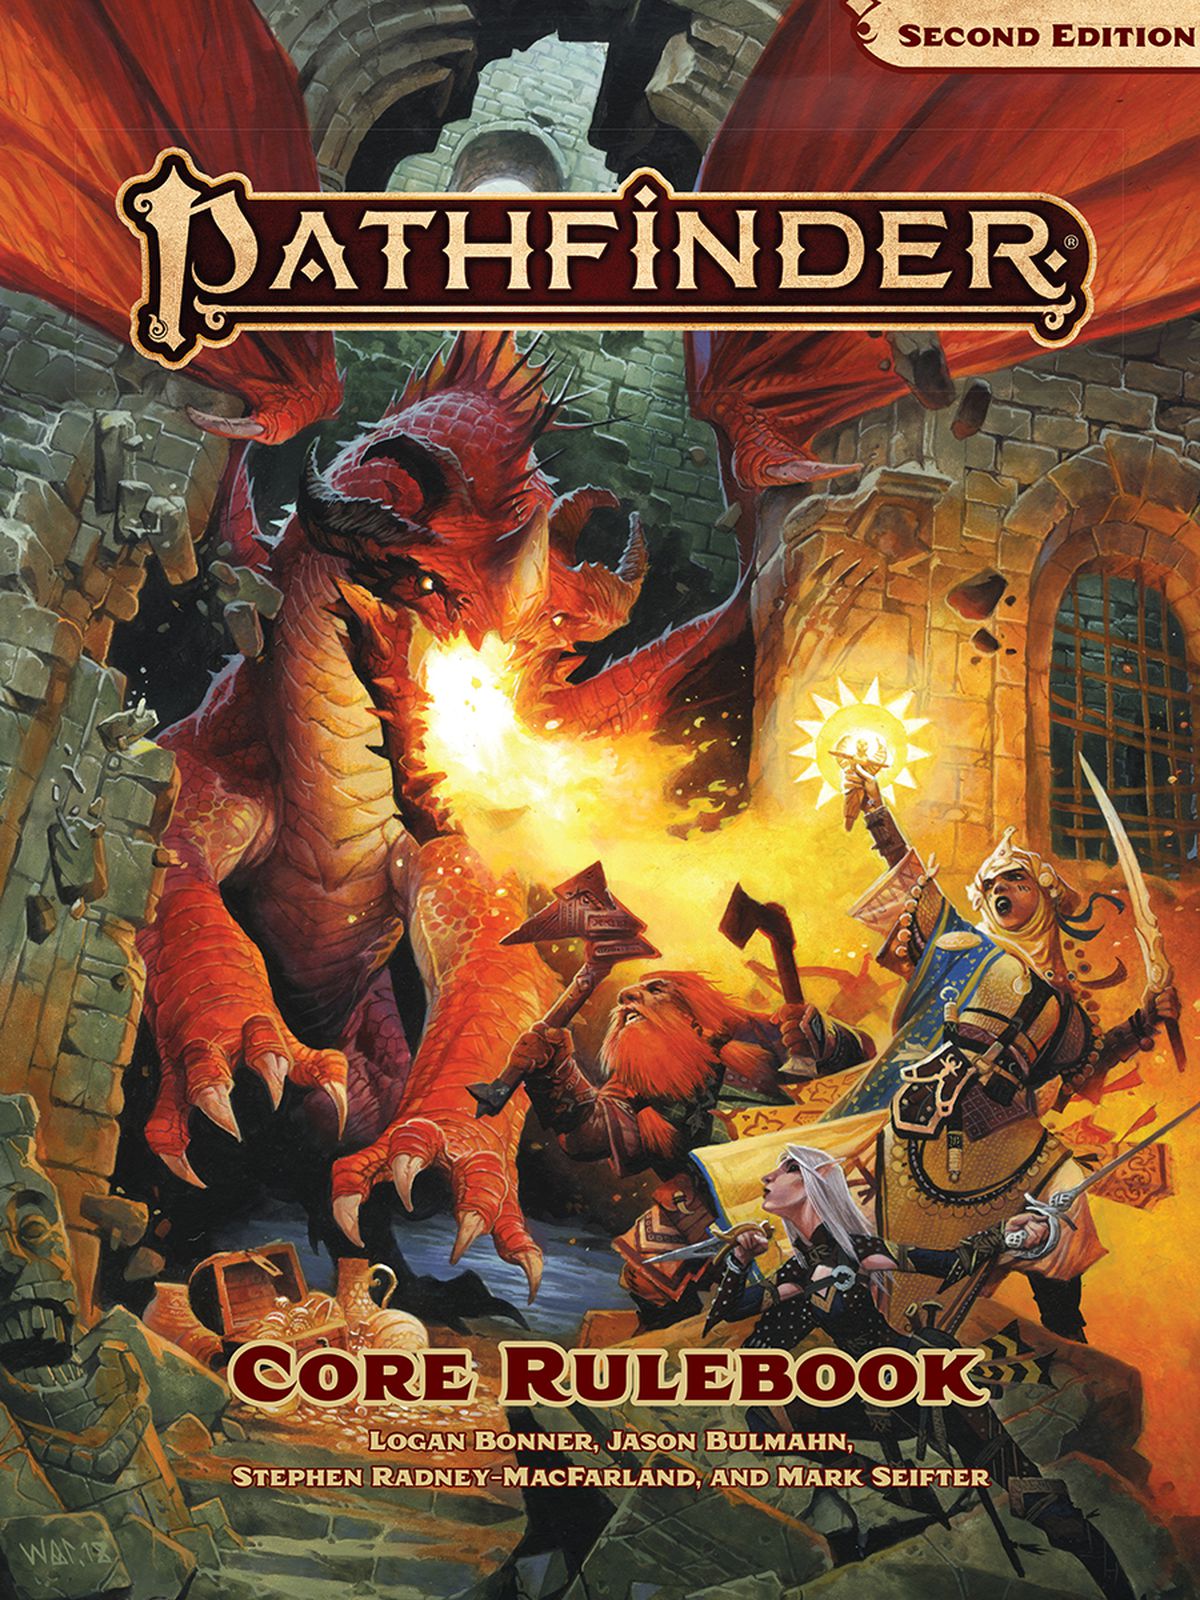 The cover of the new Pathfinder Core Rulebook shows heroes fighting against an ancient red dragon, which is bursting through the side of a decrepit castle. Flames fill the frame, while a female cleric with an exotic sword casts a spell through a holy reli